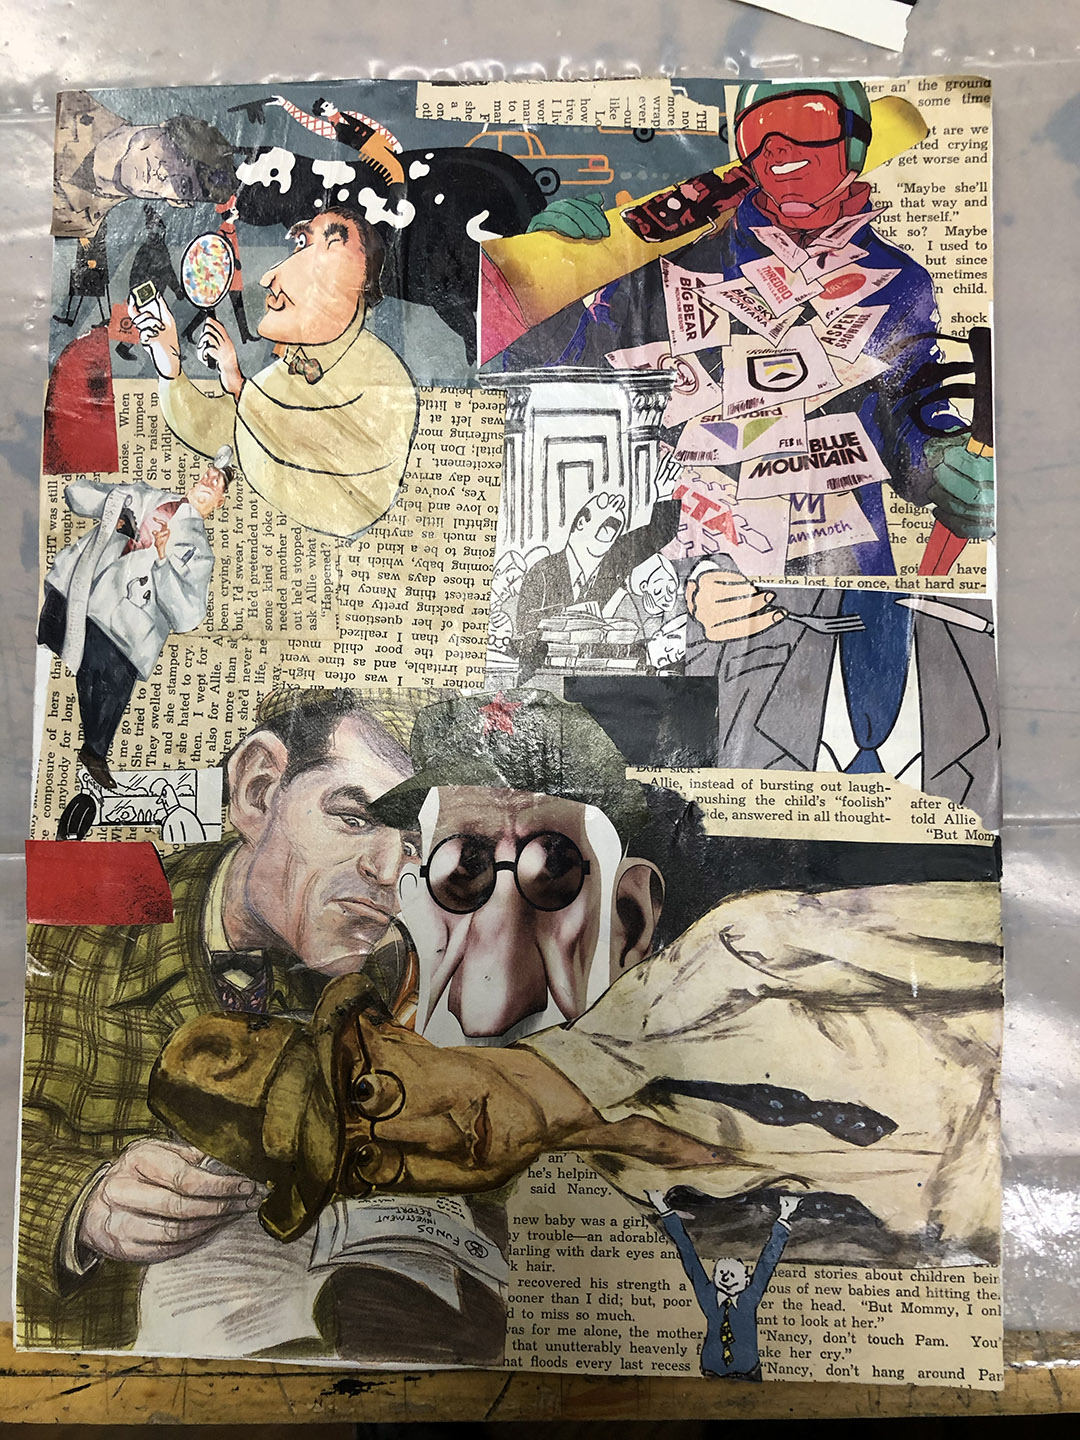 A collaged image of faces from many different magazines, books and images. There are also cutouts of writings.